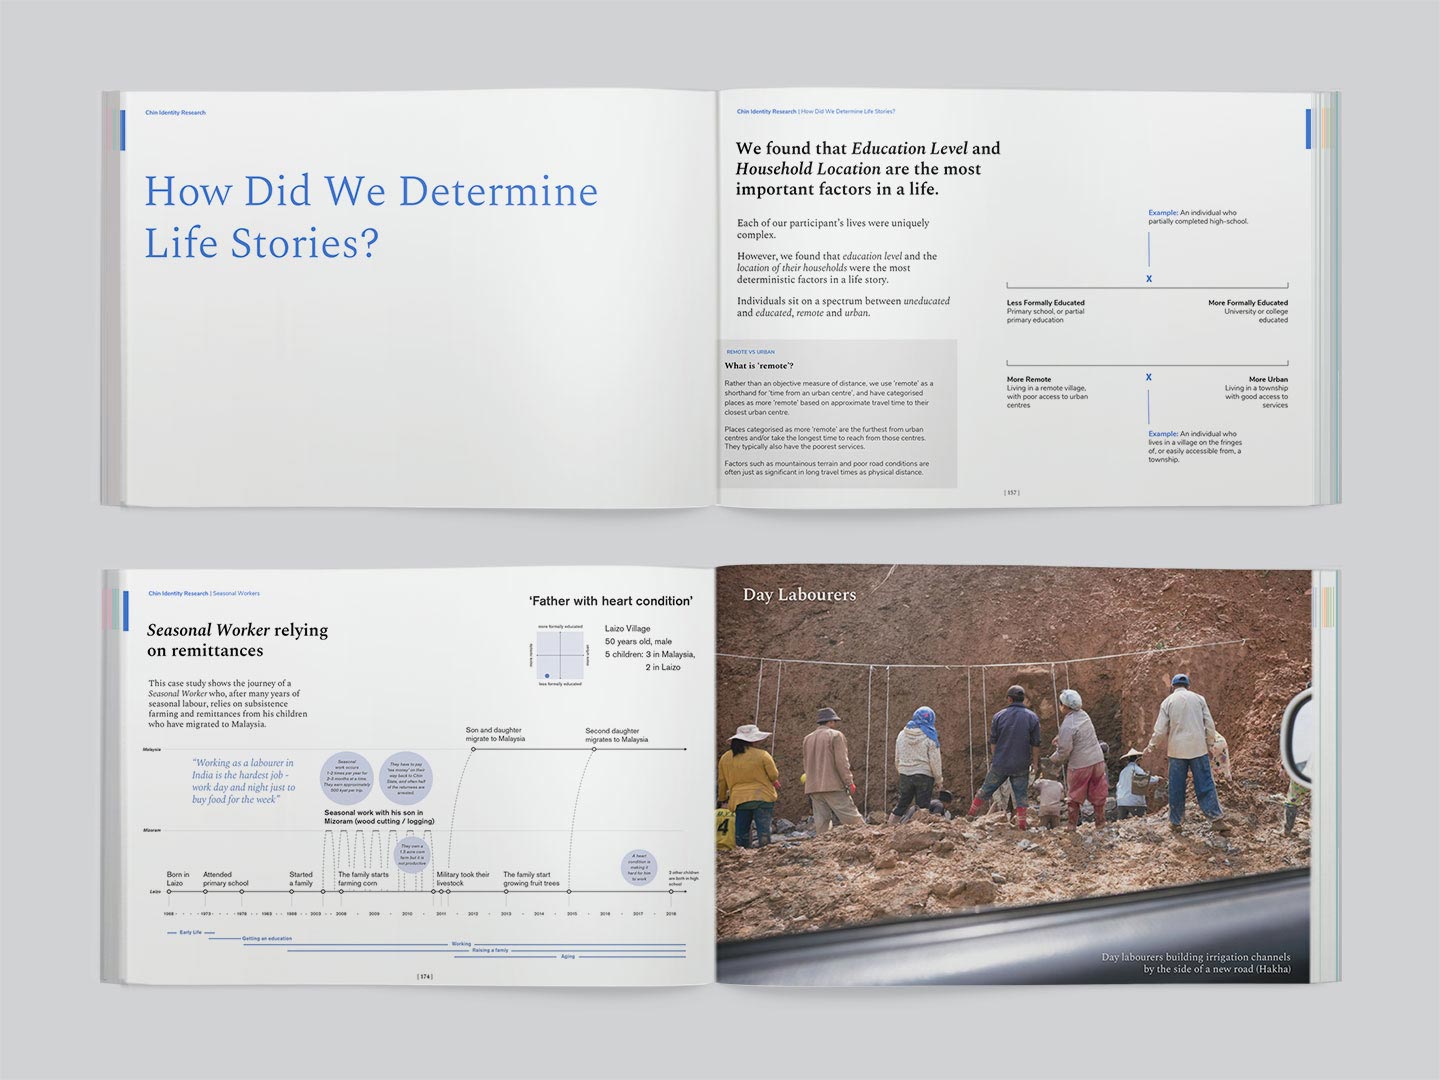 Spreads from the report, titled "How did we determine life stories?" They also show journey maps and a photo of labourers constructing a road in Myanmar.